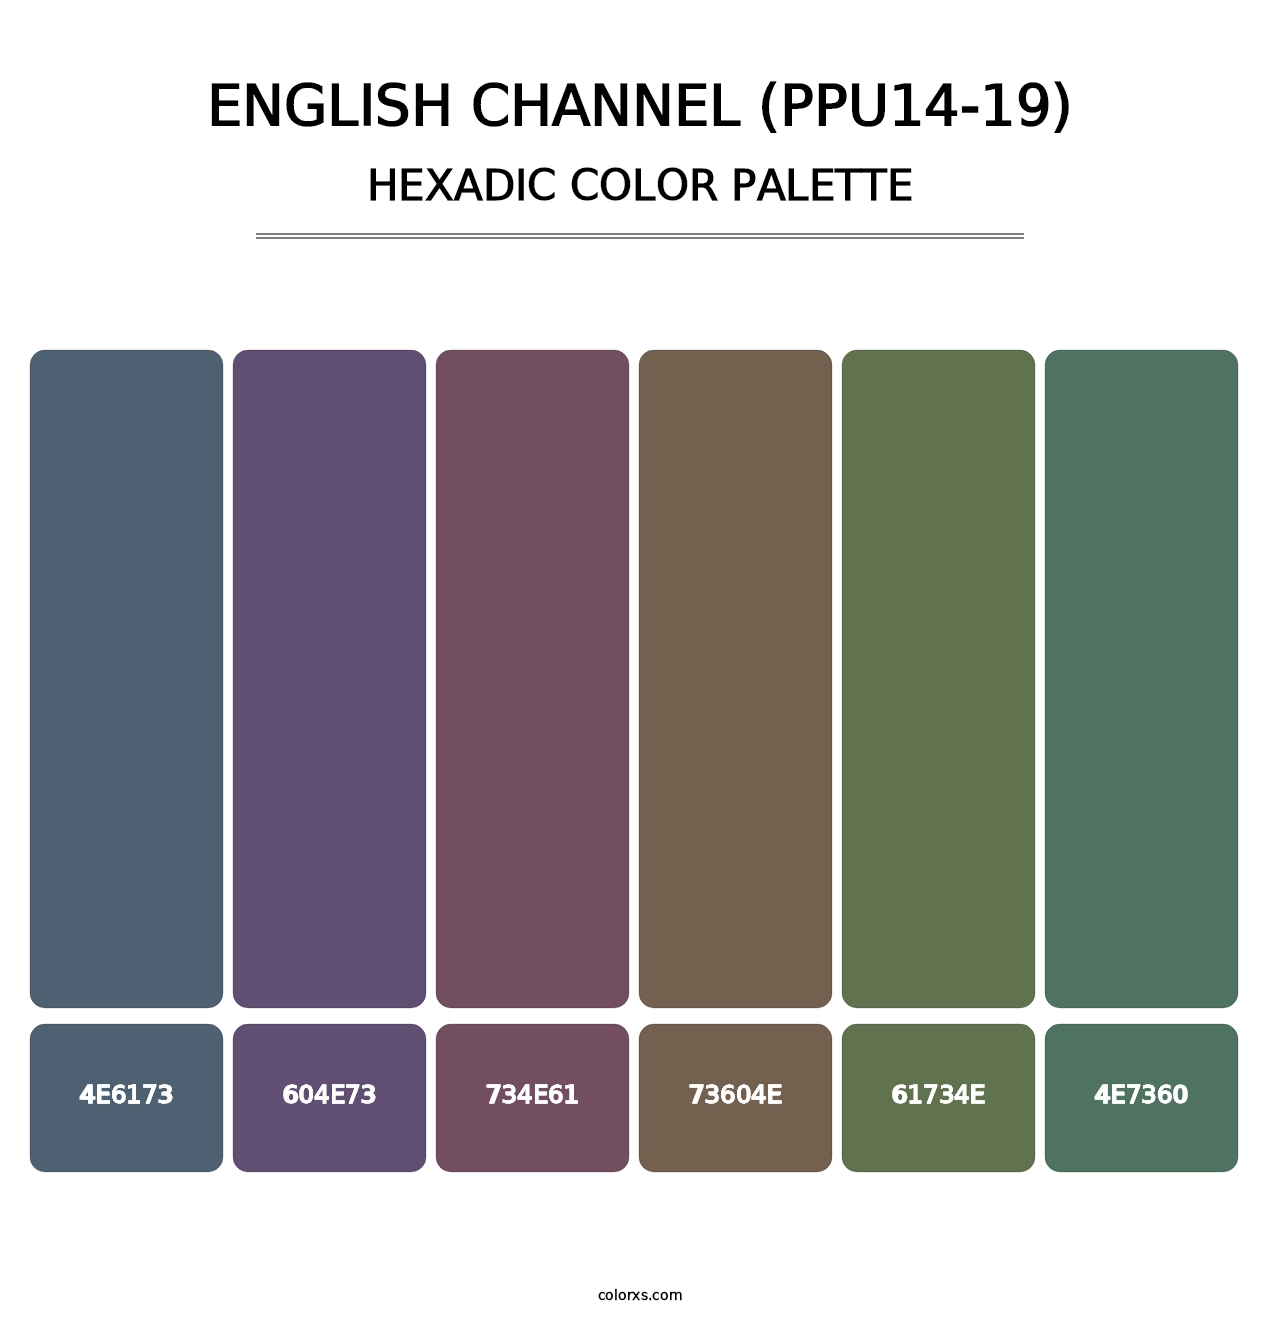 English Channel (PPU14-19) - Hexadic Color Palette